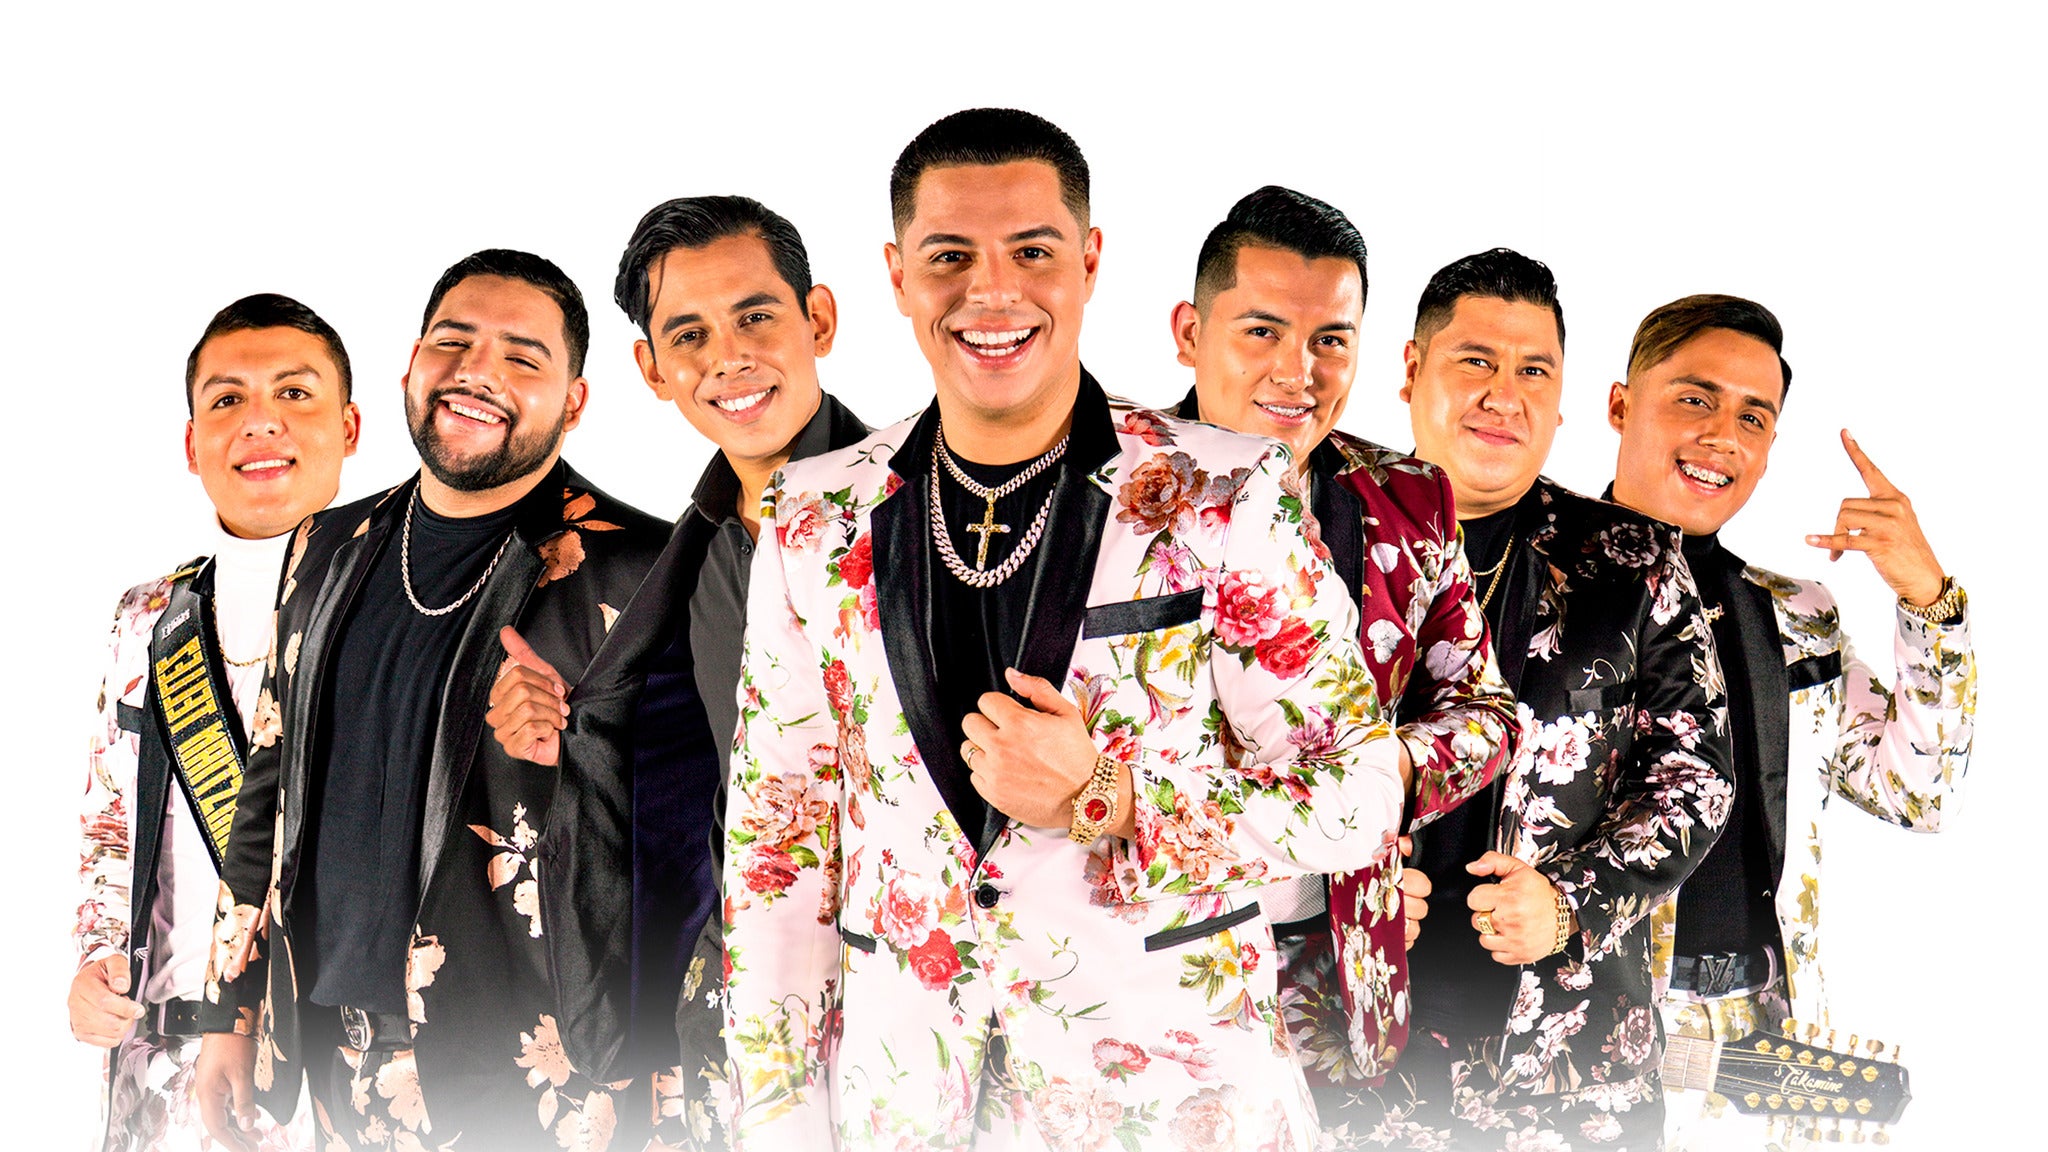 Grupo Firme presale code for early tickets in Inglewood